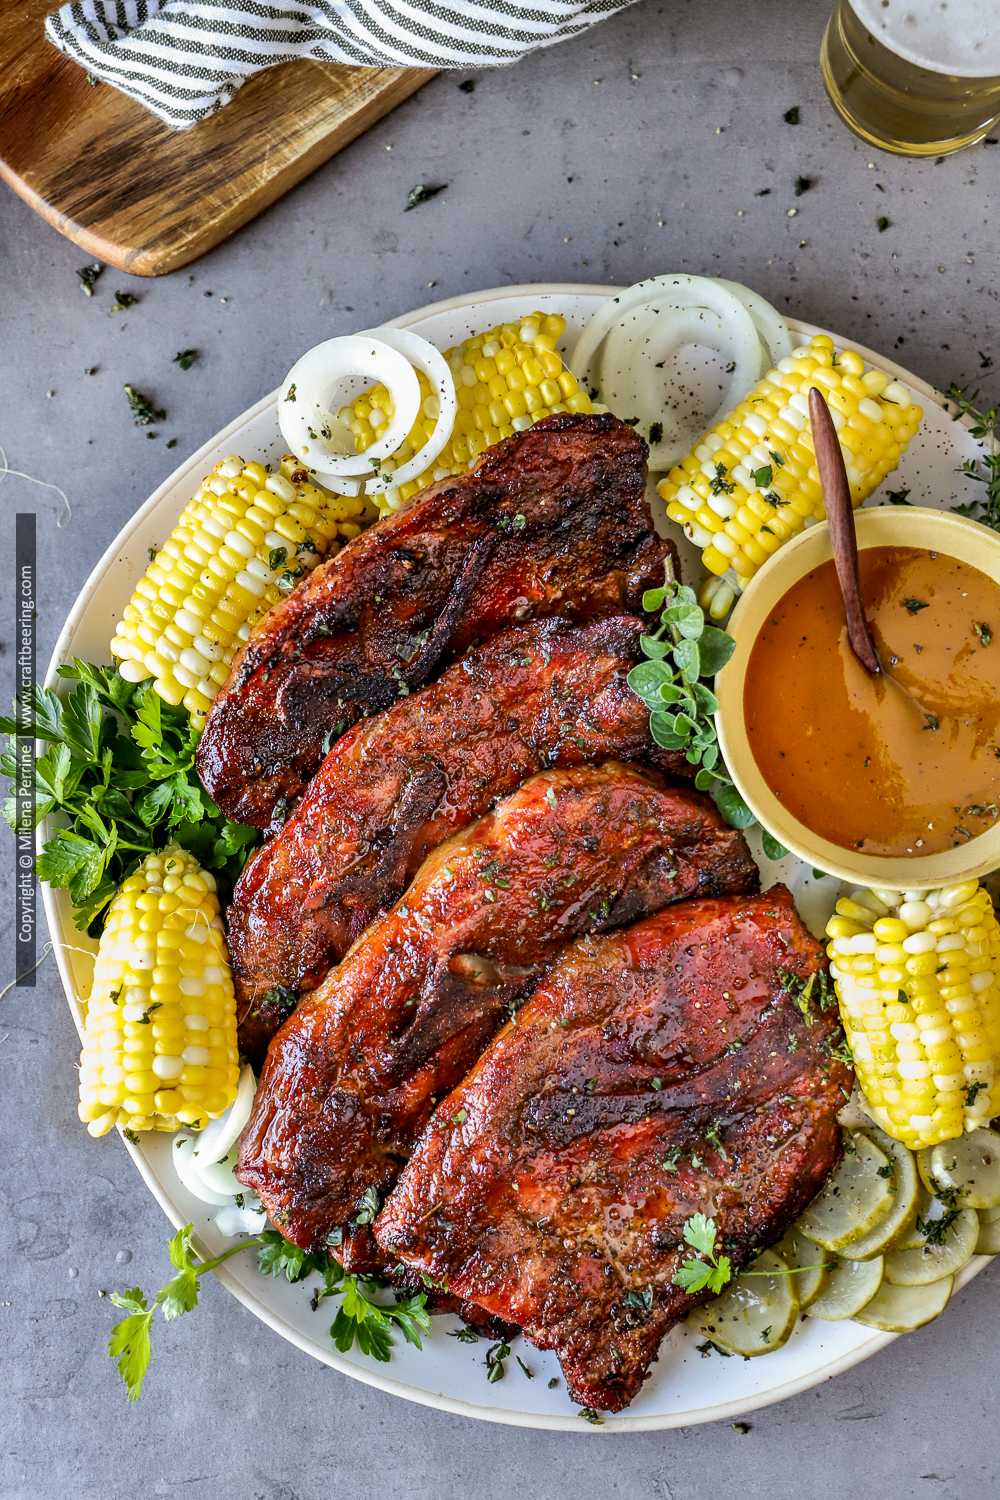 Smoked pork steaks on platter with corn on the cob.